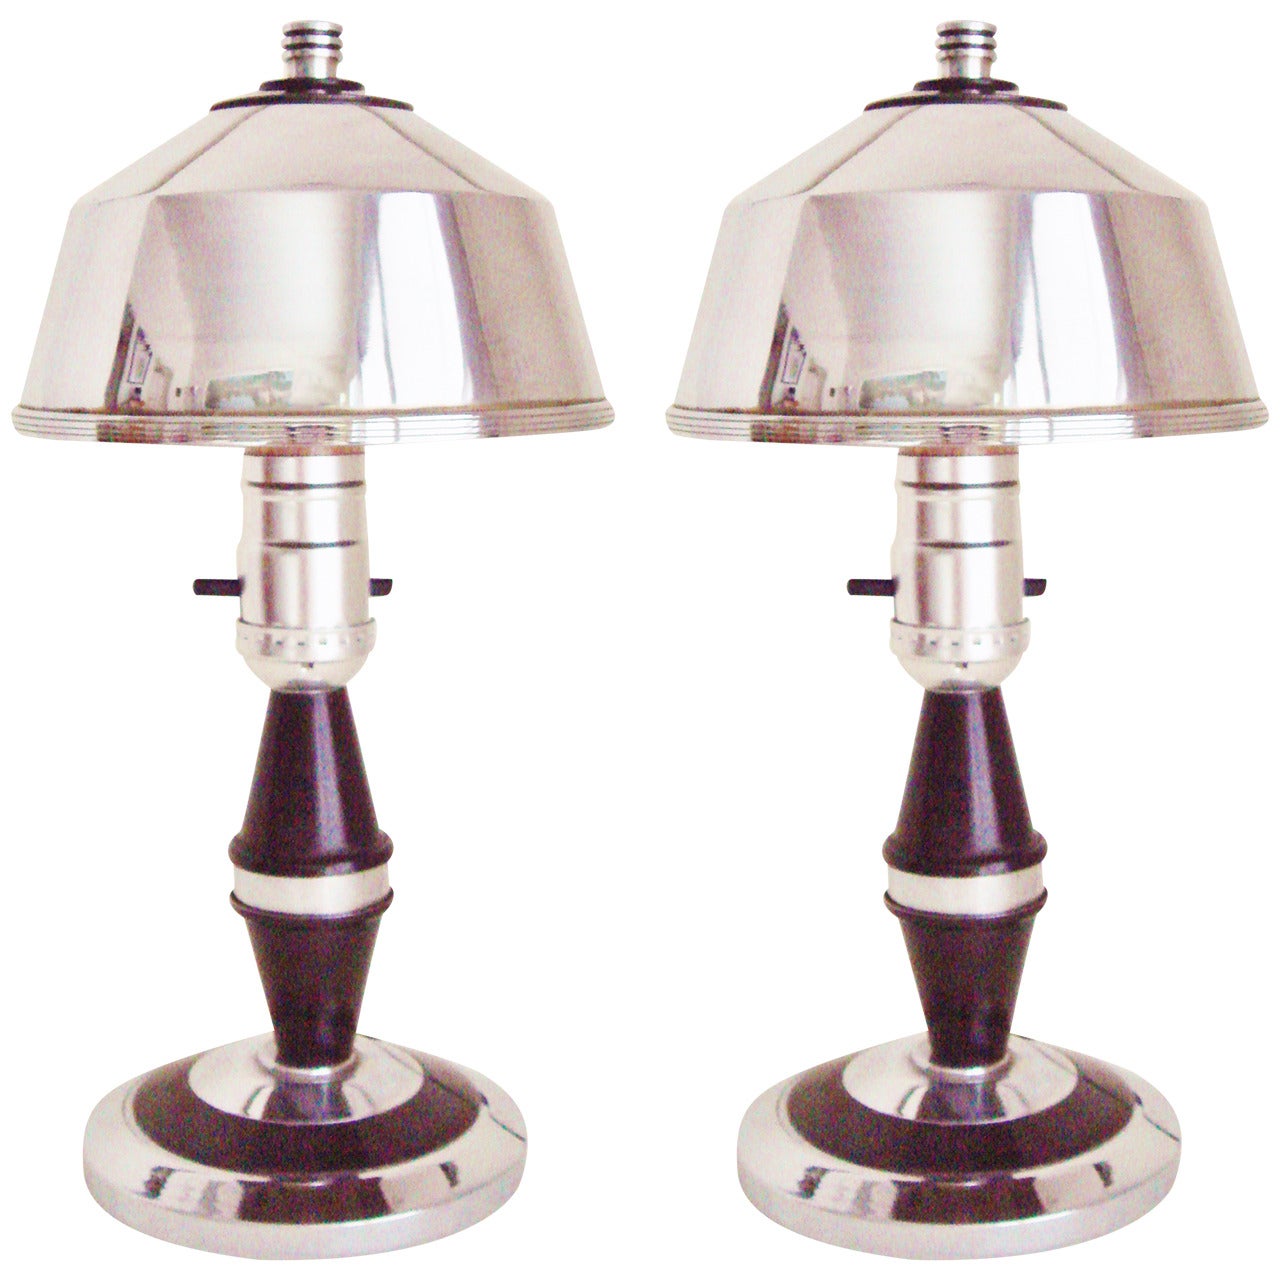 Rare Pair of American Art Deco or Machine Age Chrome and Black Boudoir Lamps